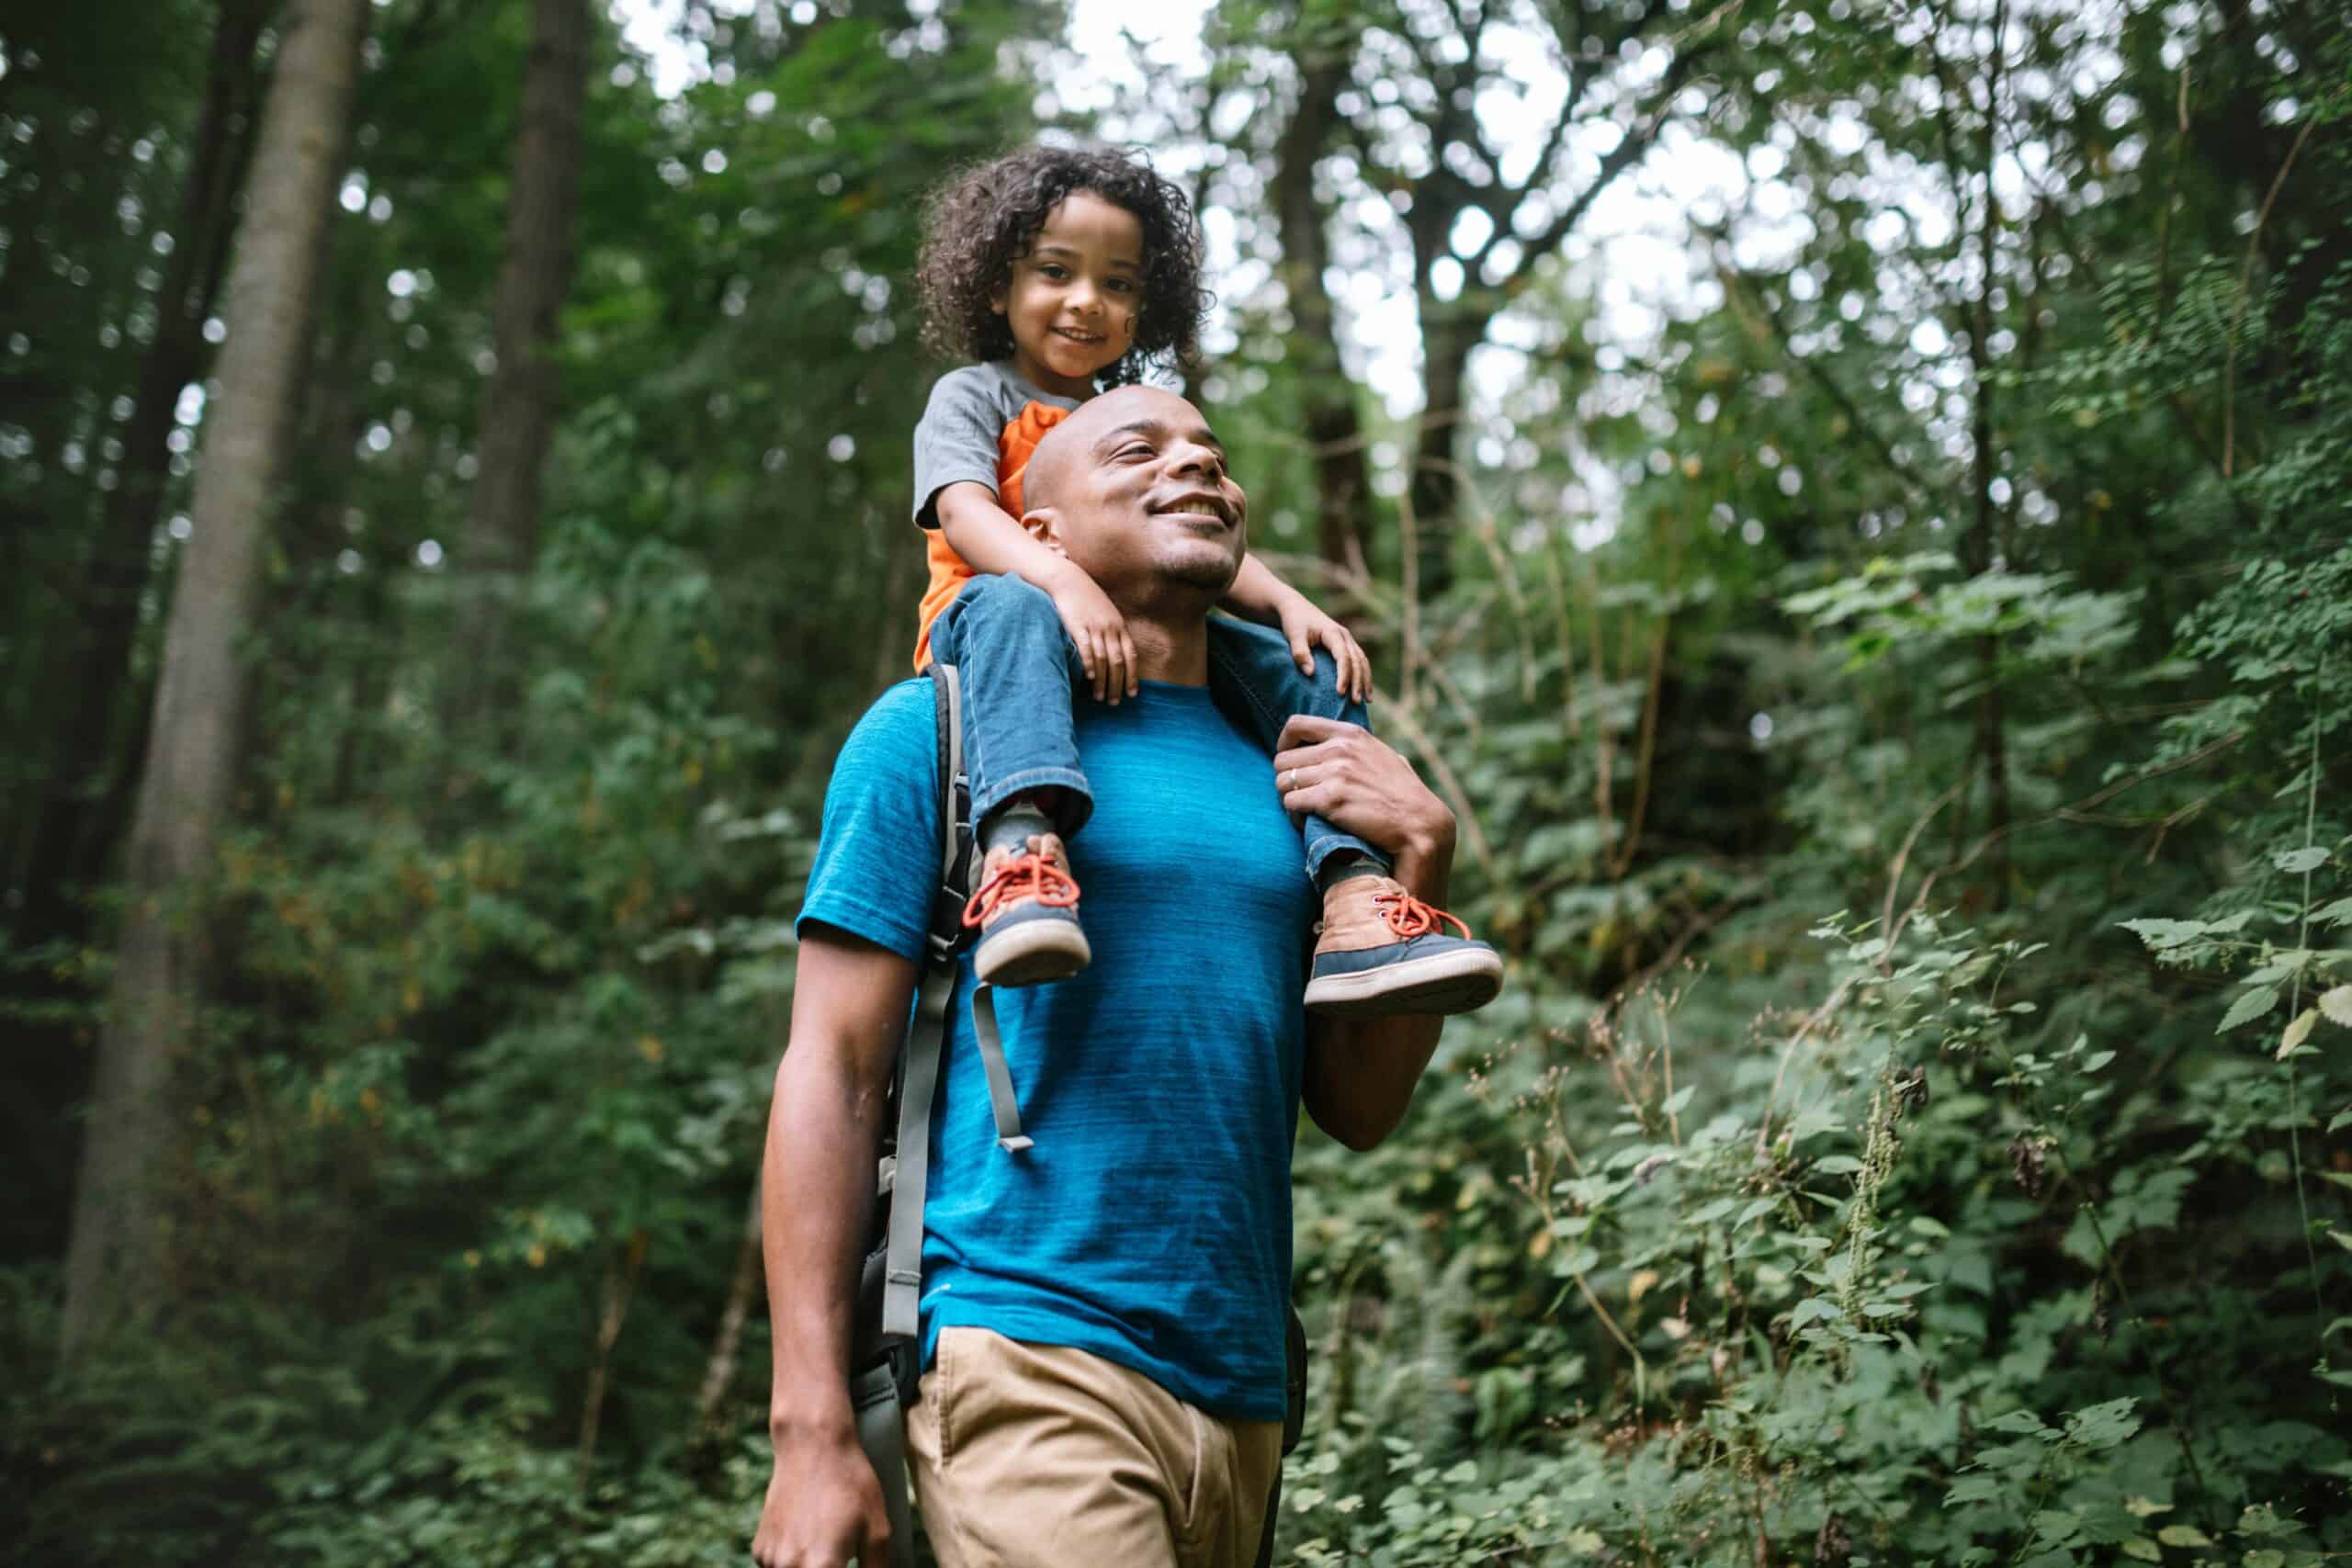 Washington people | Father Carries Son On Hike Through Forest Trail in Pacific Northwest